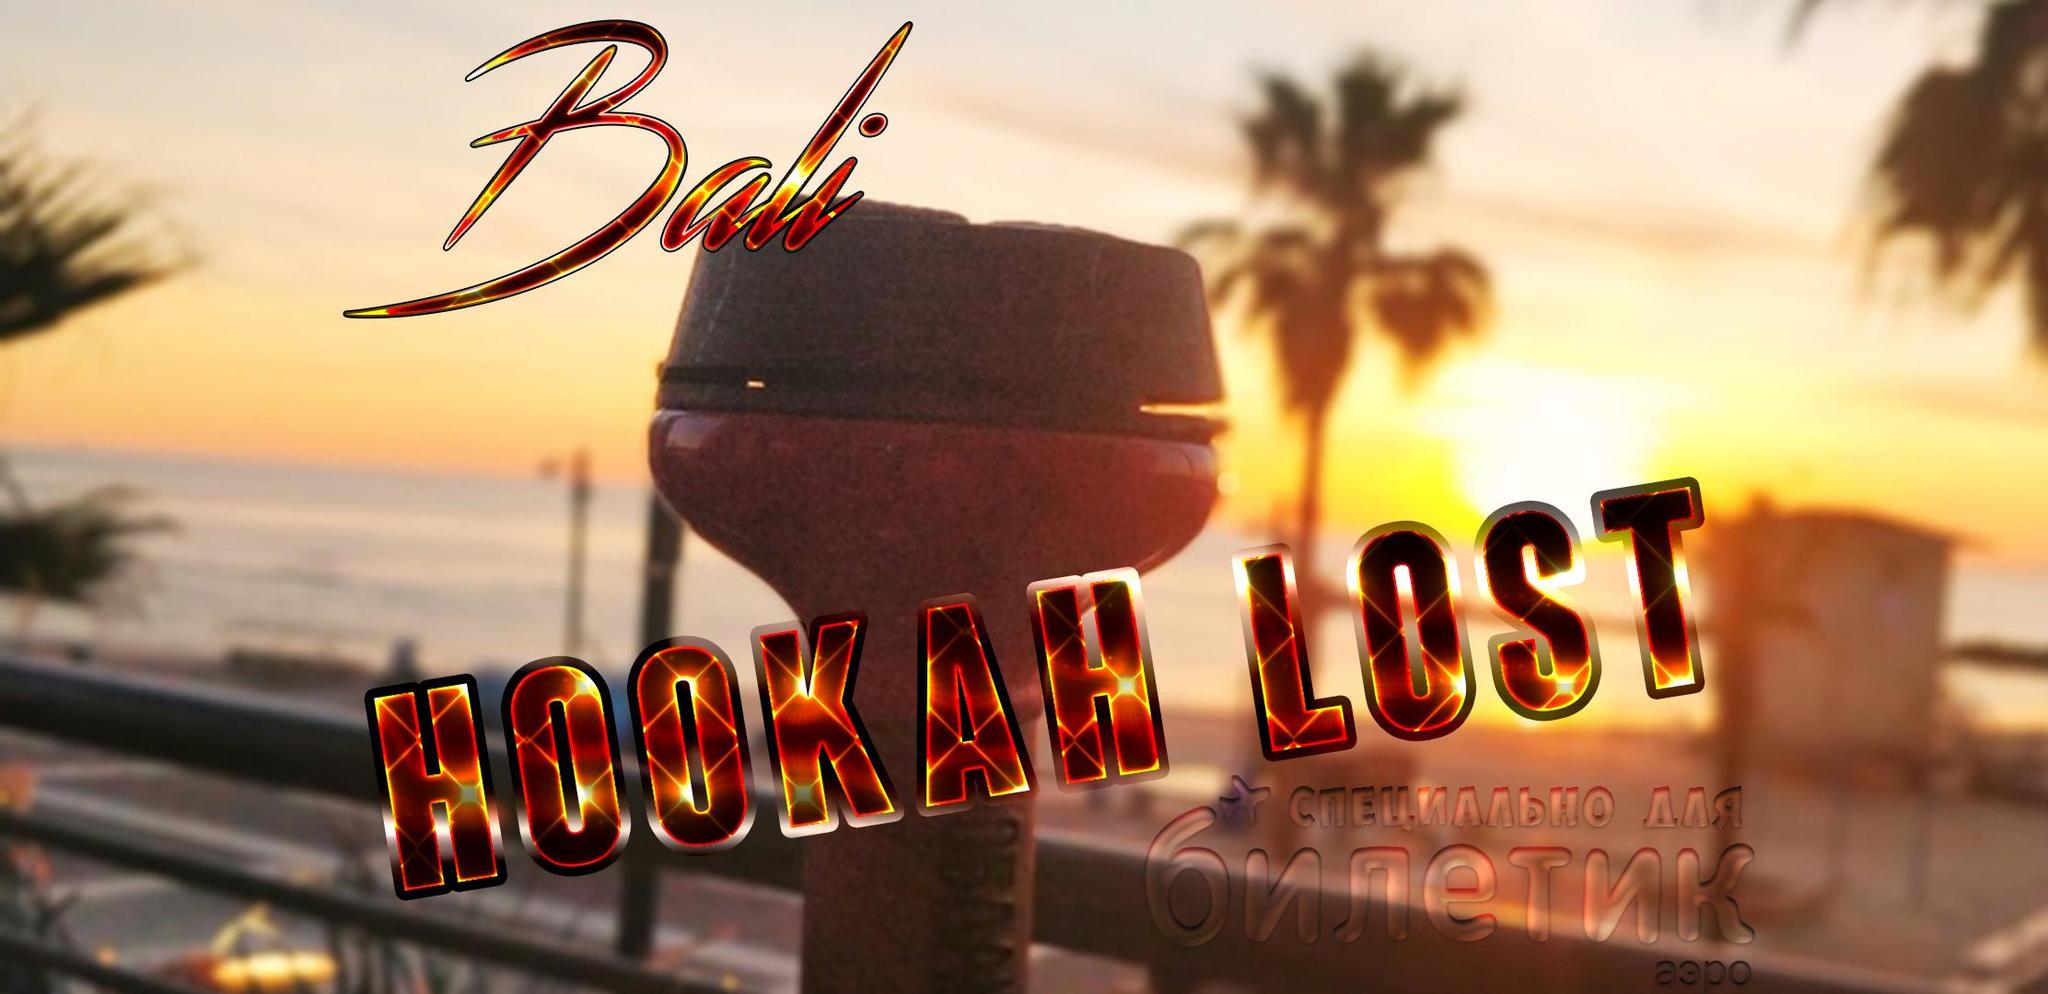 I want to go to Bali - Hookah Lost Indonesia - My, Hookah, Shisha, Hookah, Shisha, Smoke, Hookah man, Tobacco, Coconut coal, Video, Longpost